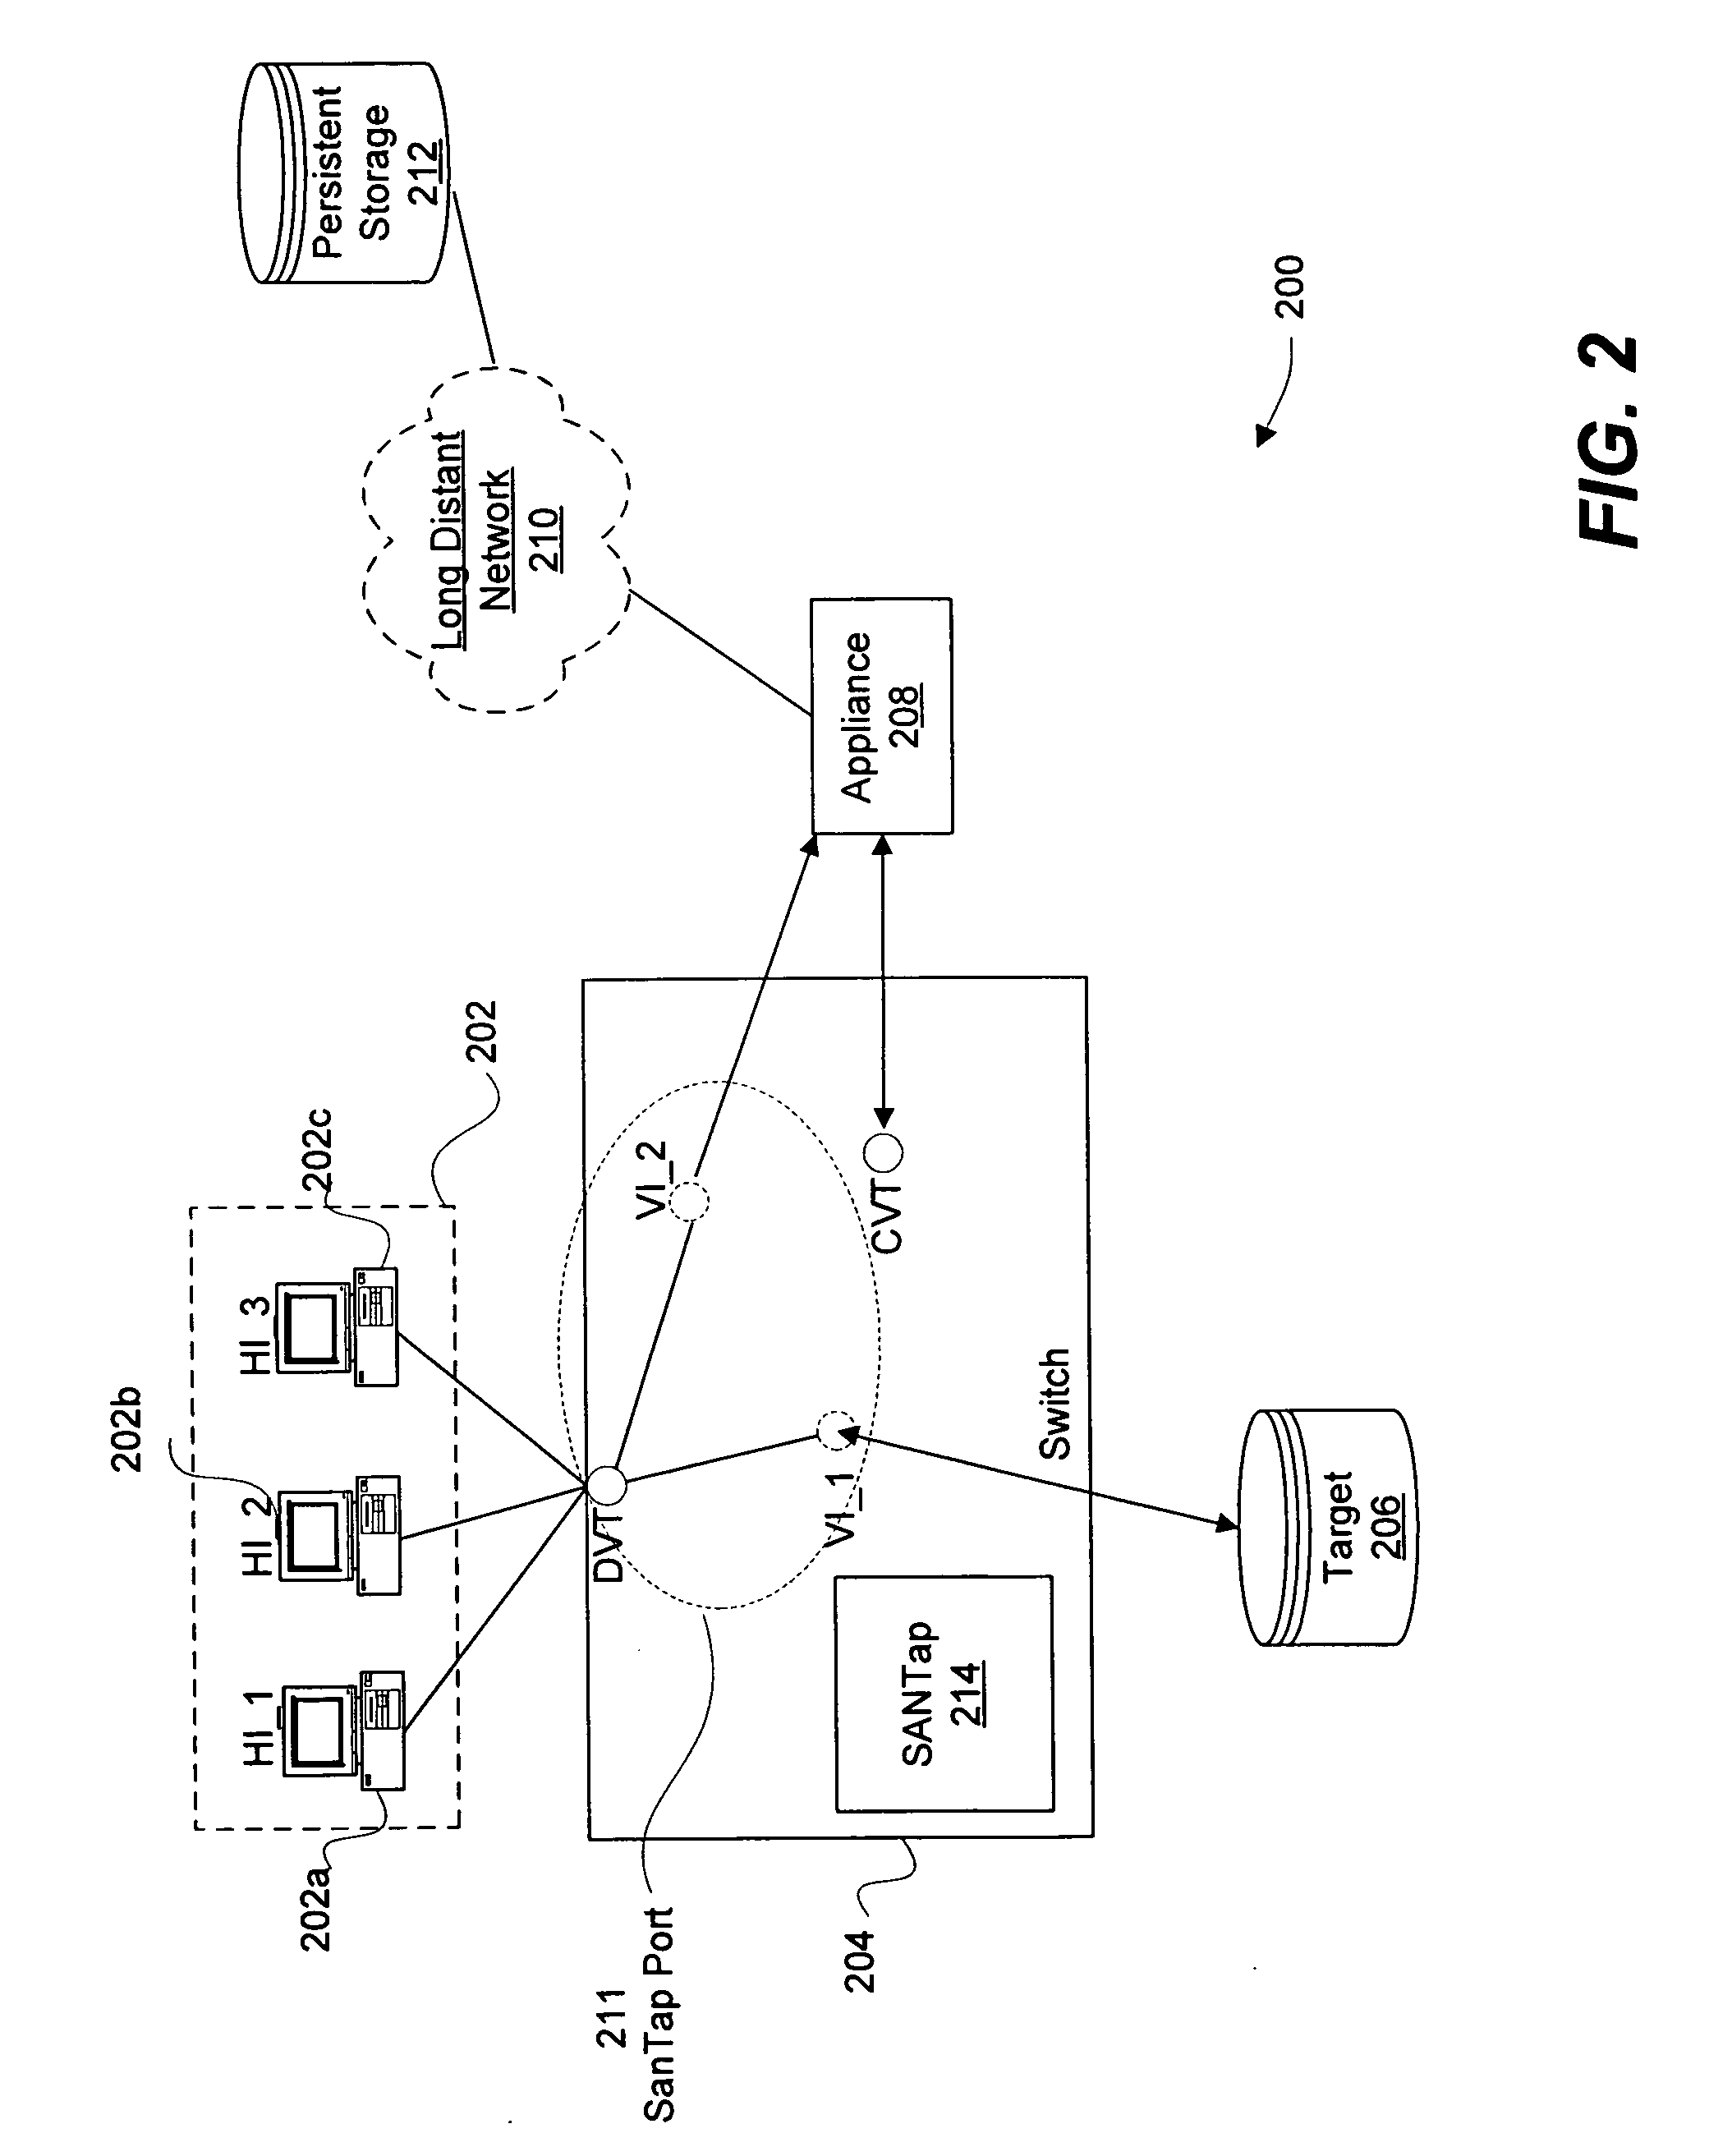 Apparatus and methods for facilitating data tapping with host clustering in a storage area network